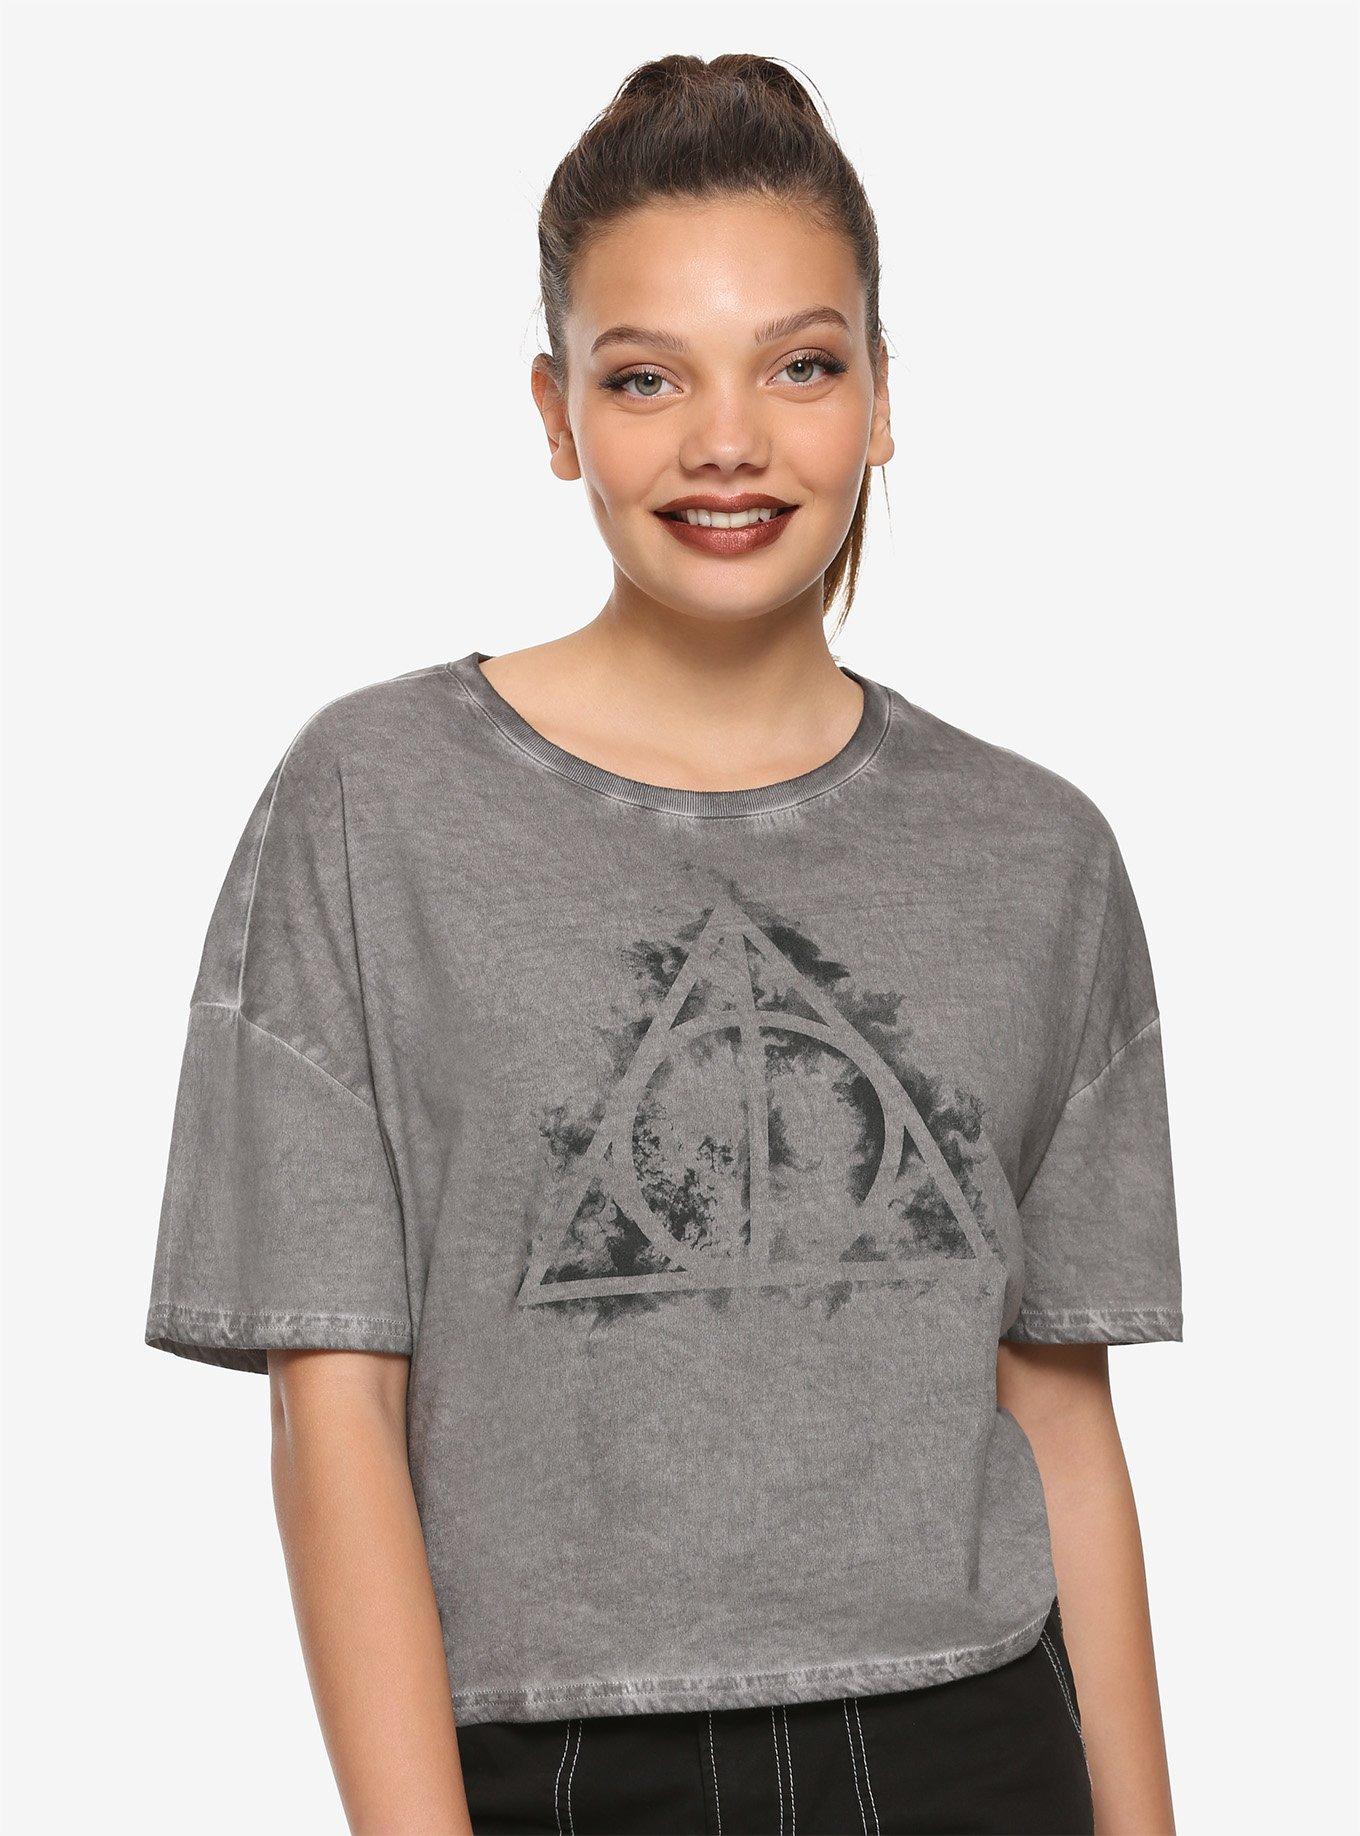 Fantastic Beasts: The Crimes Of Grindelwald Deathly Hallows Lace-Up Girls Crop Top Hot Topic Exclusive, BLACK, hi-res